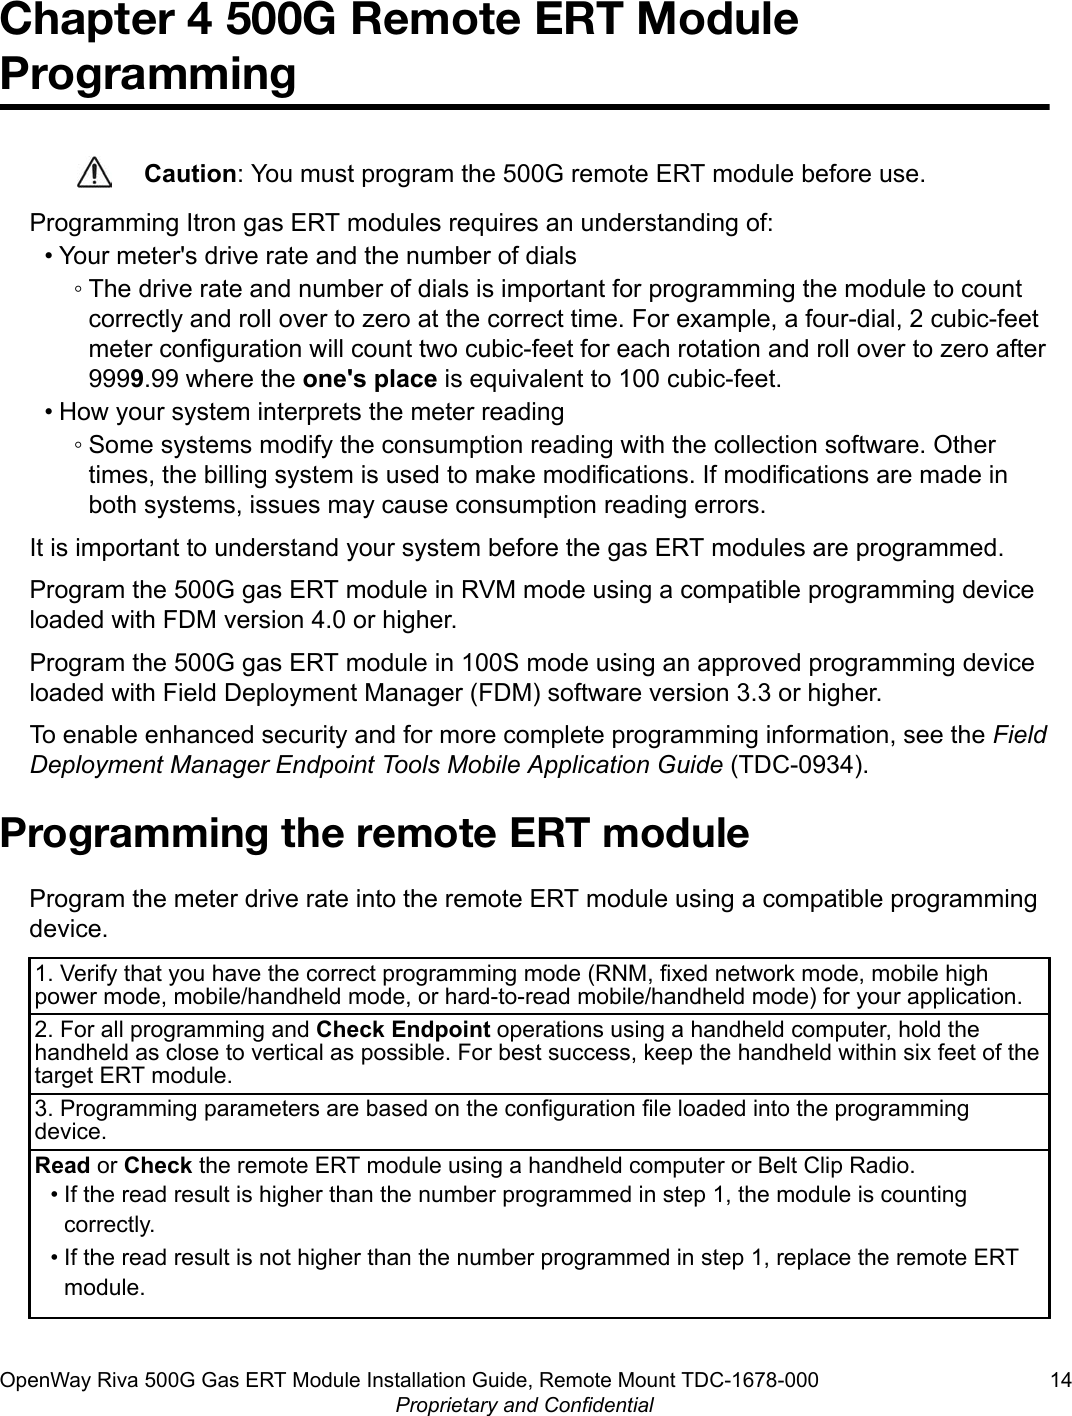 Chapter 4 500G Remote ERT ModuleProgrammingCaution: You must program the 500G remote ERT module before use.Programming Itron gas ERT modules requires an understanding of:• Your meter&apos;s drive rate and the number of dials◦ The drive rate and number of dials is important for programming the module to countcorrectly and roll over to zero at the correct time. For example, a four-dial, 2 cubic-feetmeter configuration will count two cubic-feet for each rotation and roll over to zero after9999.99 where the one&apos;s place is equivalent to 100 cubic-feet.• How your system interprets the meter reading◦ Some systems modify the consumption reading with the collection software. Othertimes, the billing system is used to make modifications. If modifications are made inboth systems, issues may cause consumption reading errors.It is important to understand your system before the gas ERT modules are programmed.Program the 500G gas ERT module in RVM mode using a compatible programming deviceloaded with FDM version 4.0 or higher.Program the 500G gas ERT module in 100S mode using an approved programming deviceloaded with Field Deployment Manager (FDM) software version 3.3 or higher.To enable enhanced security and for more complete programming information, see the FieldDeployment Manager Endpoint Tools Mobile Application Guide (TDC-0934).Programming the remote ERT moduleProgram the meter drive rate into the remote ERT module using a compatible programmingdevice.1. Verify that you have the correct programming mode (RNM, fixed network mode, mobile highpower mode, mobile/handheld mode, or hard-to-read mobile/handheld mode) for your application.2. For all programming and Check Endpoint operations using a handheld computer, hold thehandheld as close to vertical as possible. For best success, keep the handheld within six feet of thetarget ERT module.3. Programming parameters are based on the configuration file loaded into the programmingdevice.Read or Check the remote ERT module using a handheld computer or Belt Clip Radio.• If the read result is higher than the number programmed in step 1, the module is countingcorrectly.• If the read result is not higher than the number programmed in step 1, replace the remote ERTmodule.OpenWay Riva 500G Gas ERT Module Installation Guide, Remote Mount TDC-1678-000 14Proprietary and Confidential